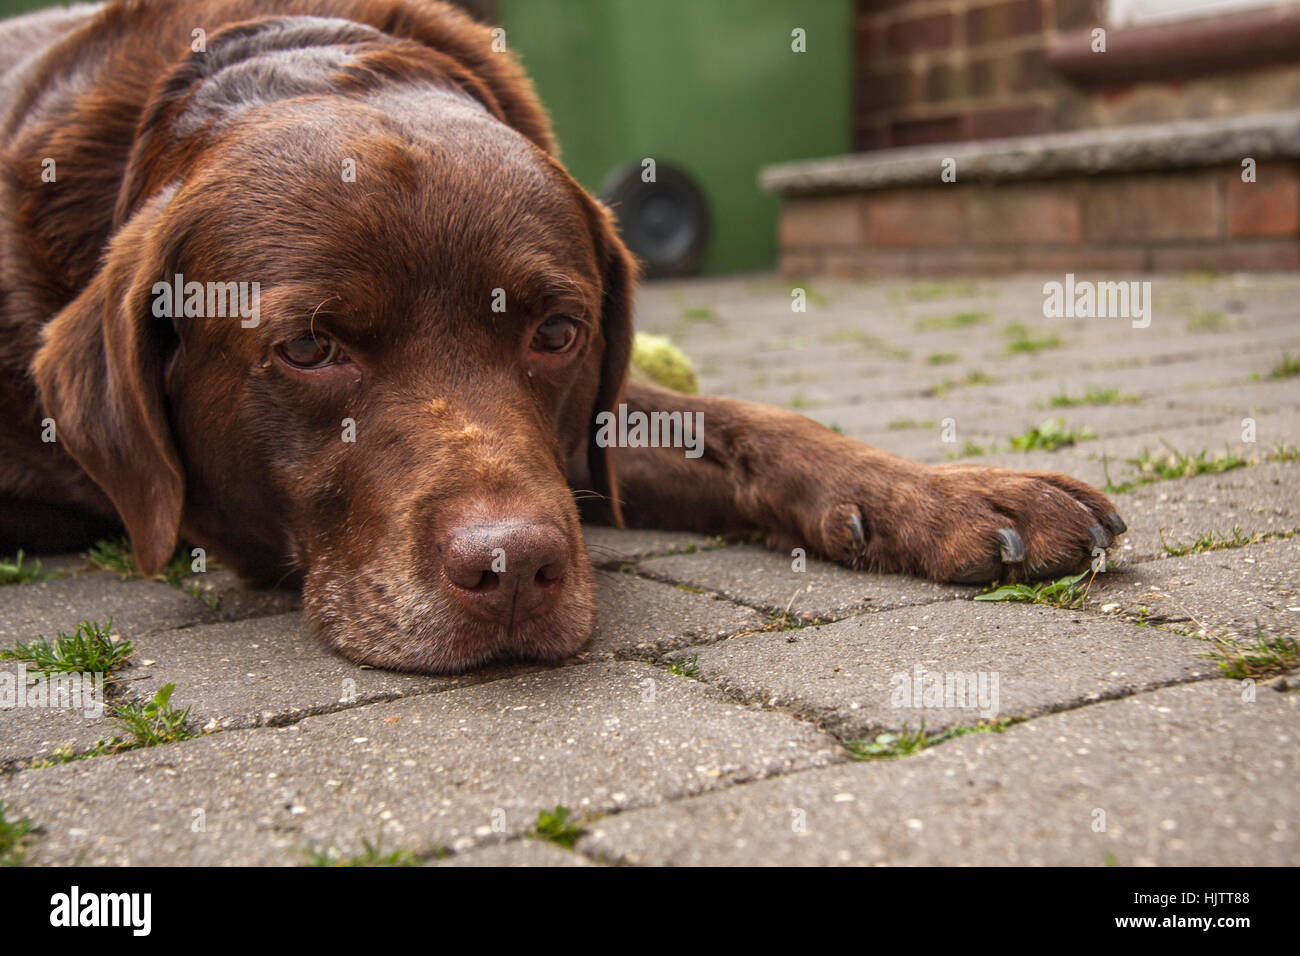 Brown/red/chocolate labrador retriever dog laid down outside looking at camera Stock Photo